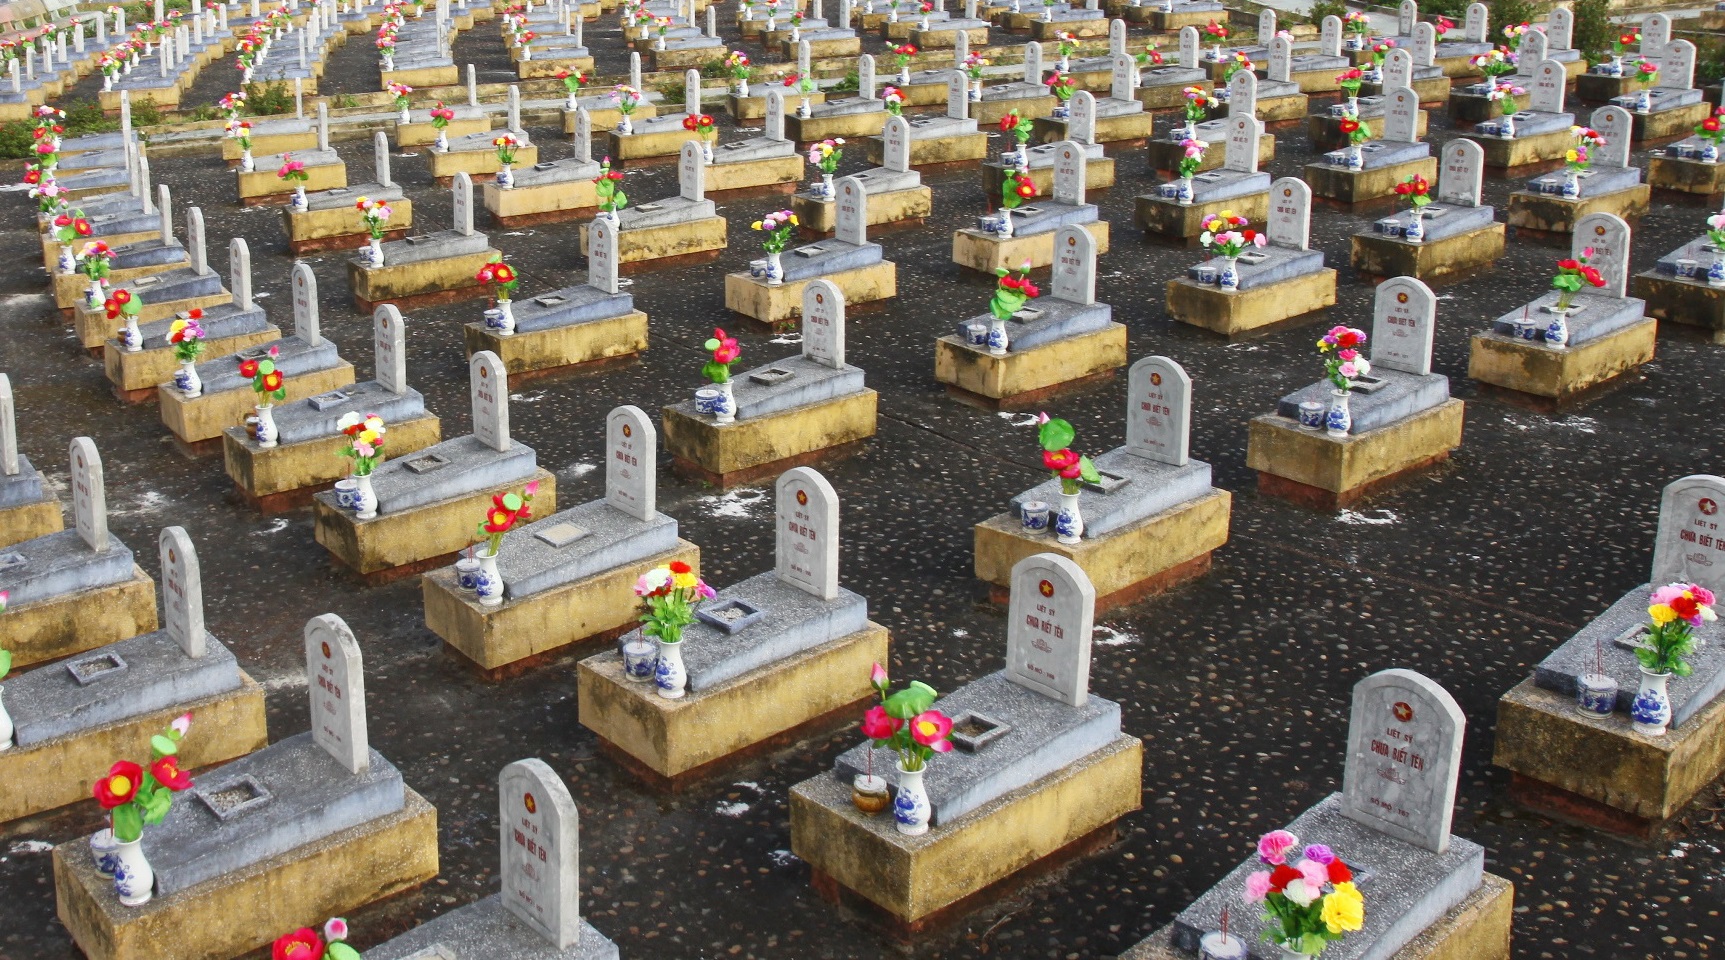 Thousands of graves of unknown martyrs at the Road 9 National Martyrs’ Cemetery in Quang Tri (Photo: VNA)